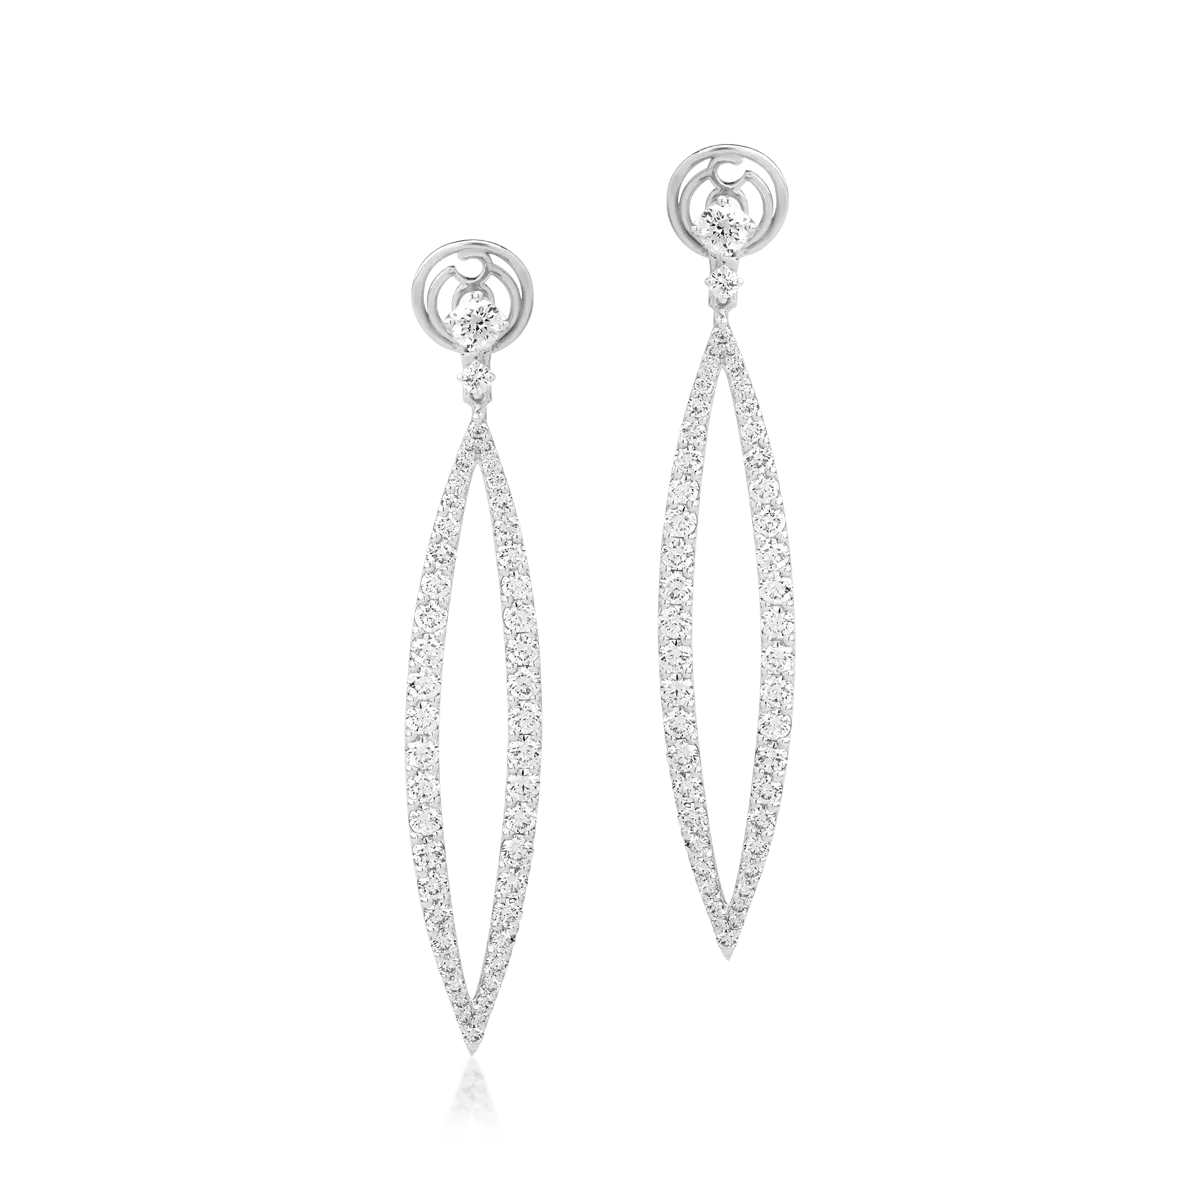 18K white gold earrings with 5.88ct diamonds